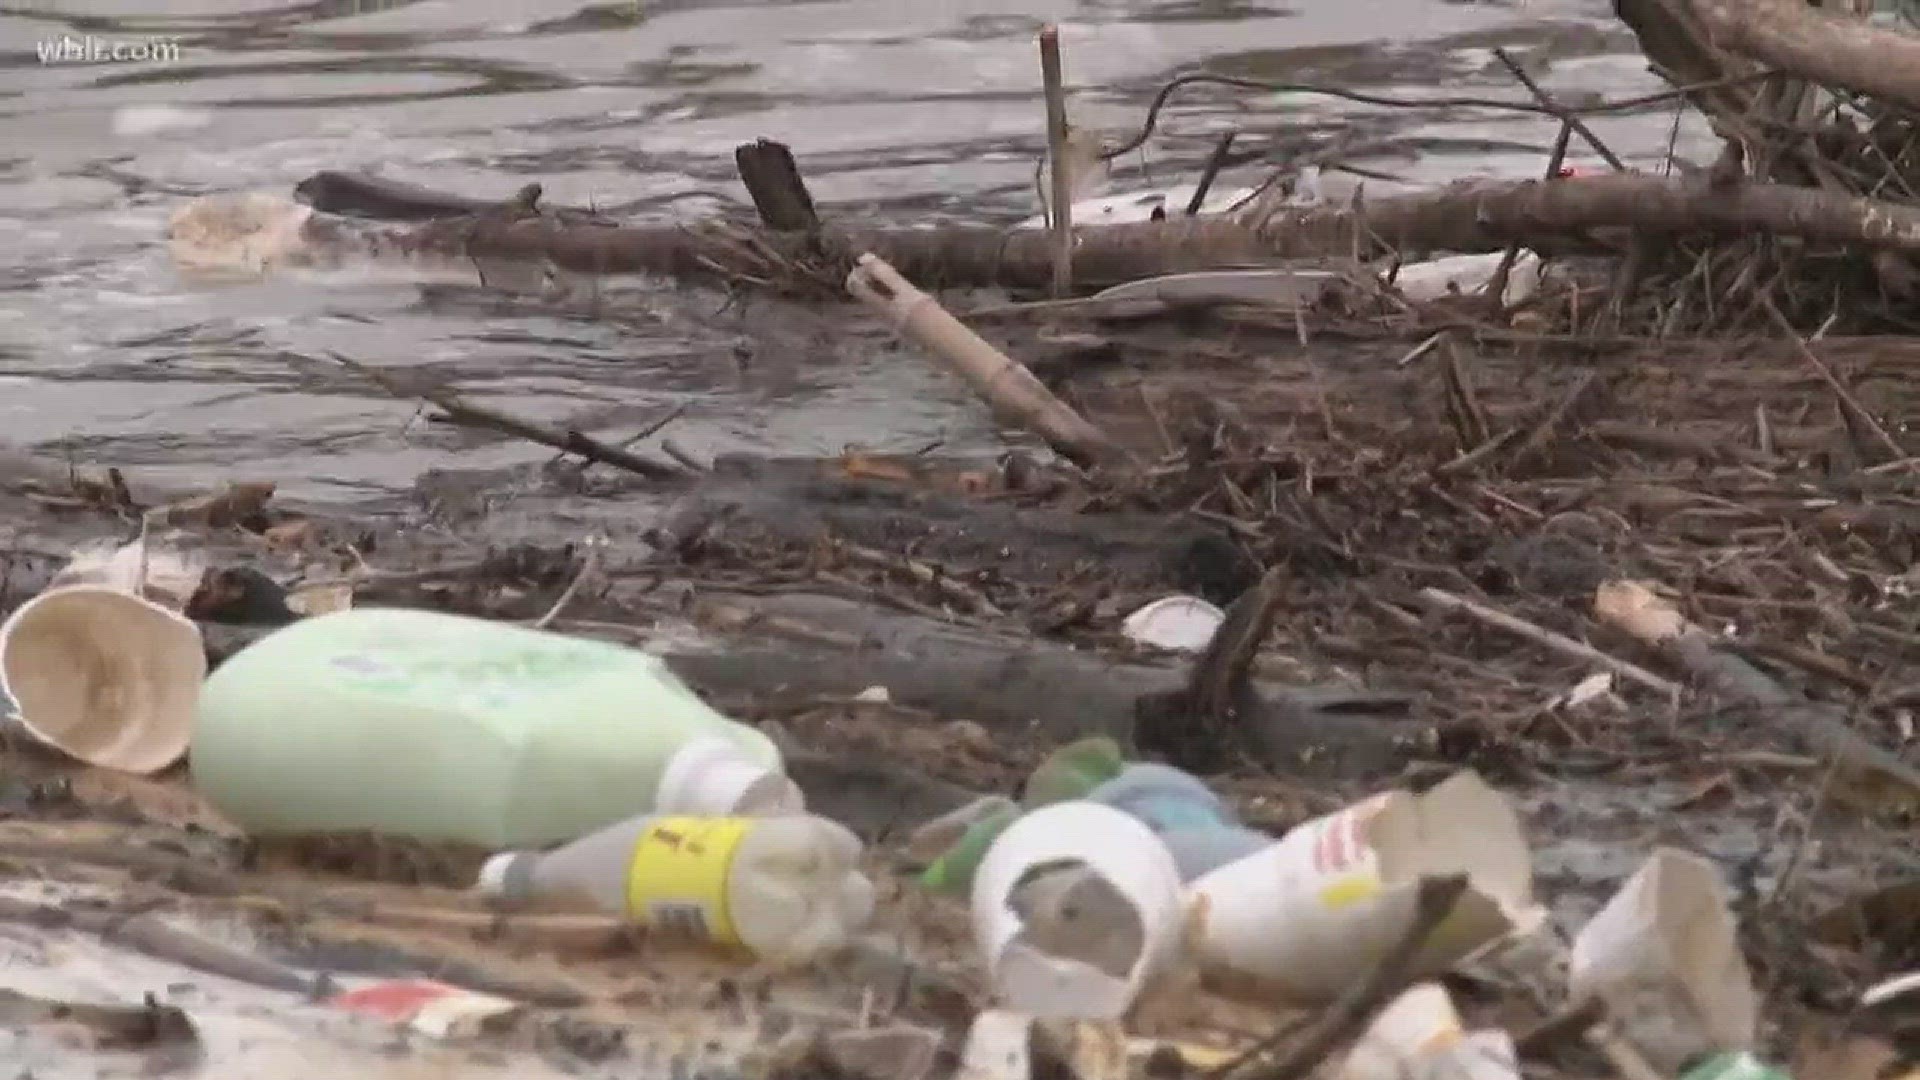 The Tennessee River is carrying more trash down stream after heavy rainfall.